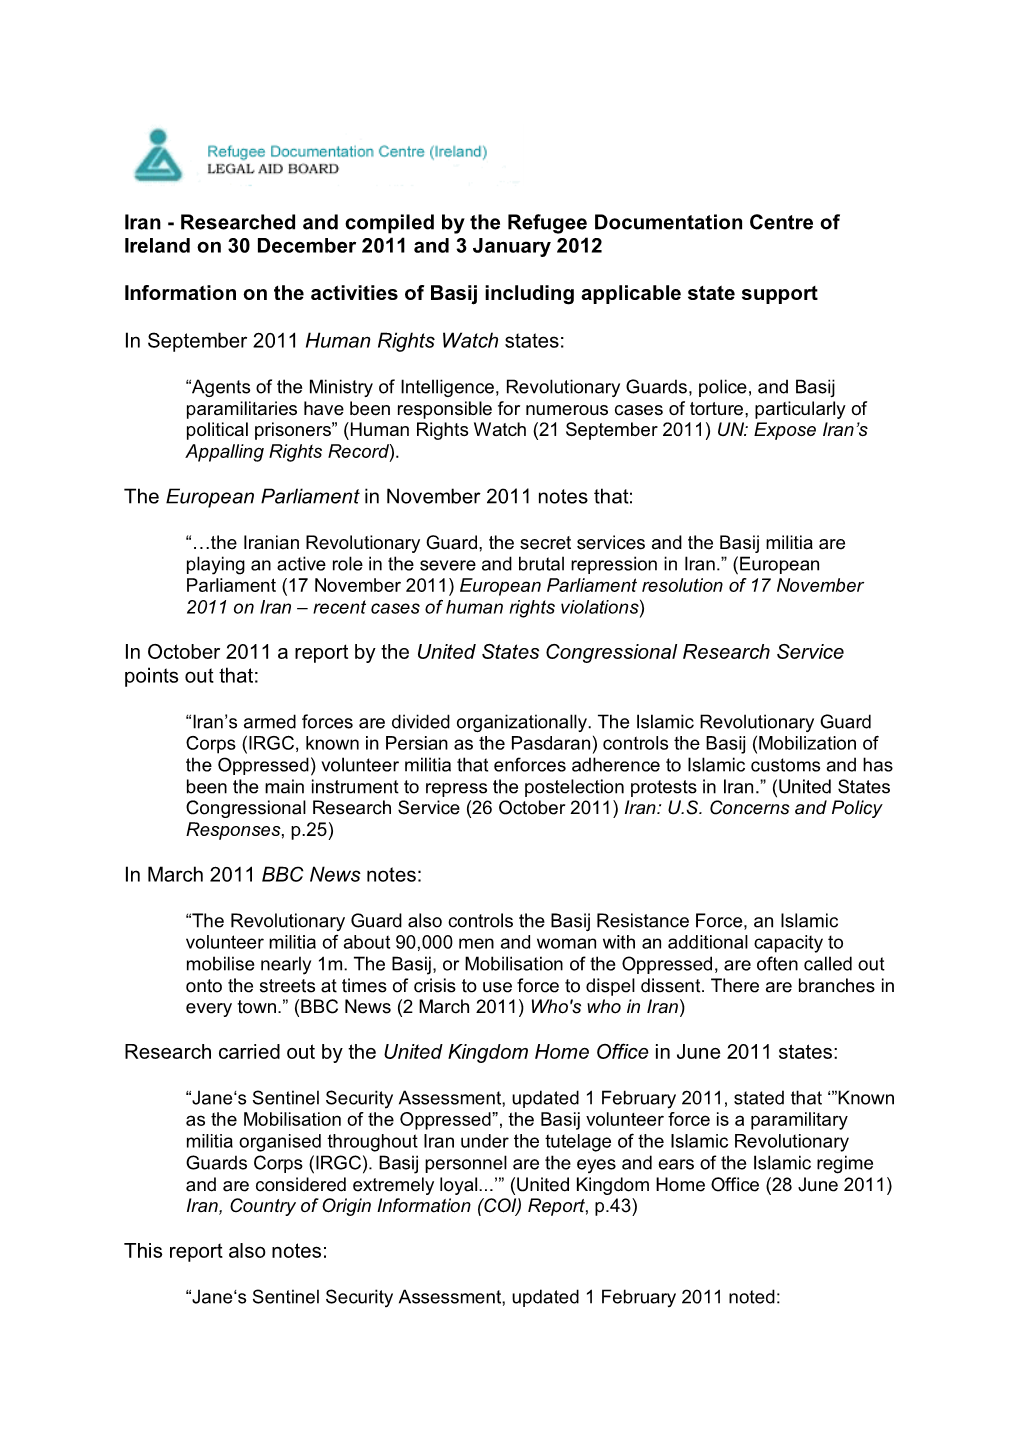 Iran - Researched and Compiled by the Refugee Documentation Centre of Ireland on 30 December 2011 and 3 January 2012